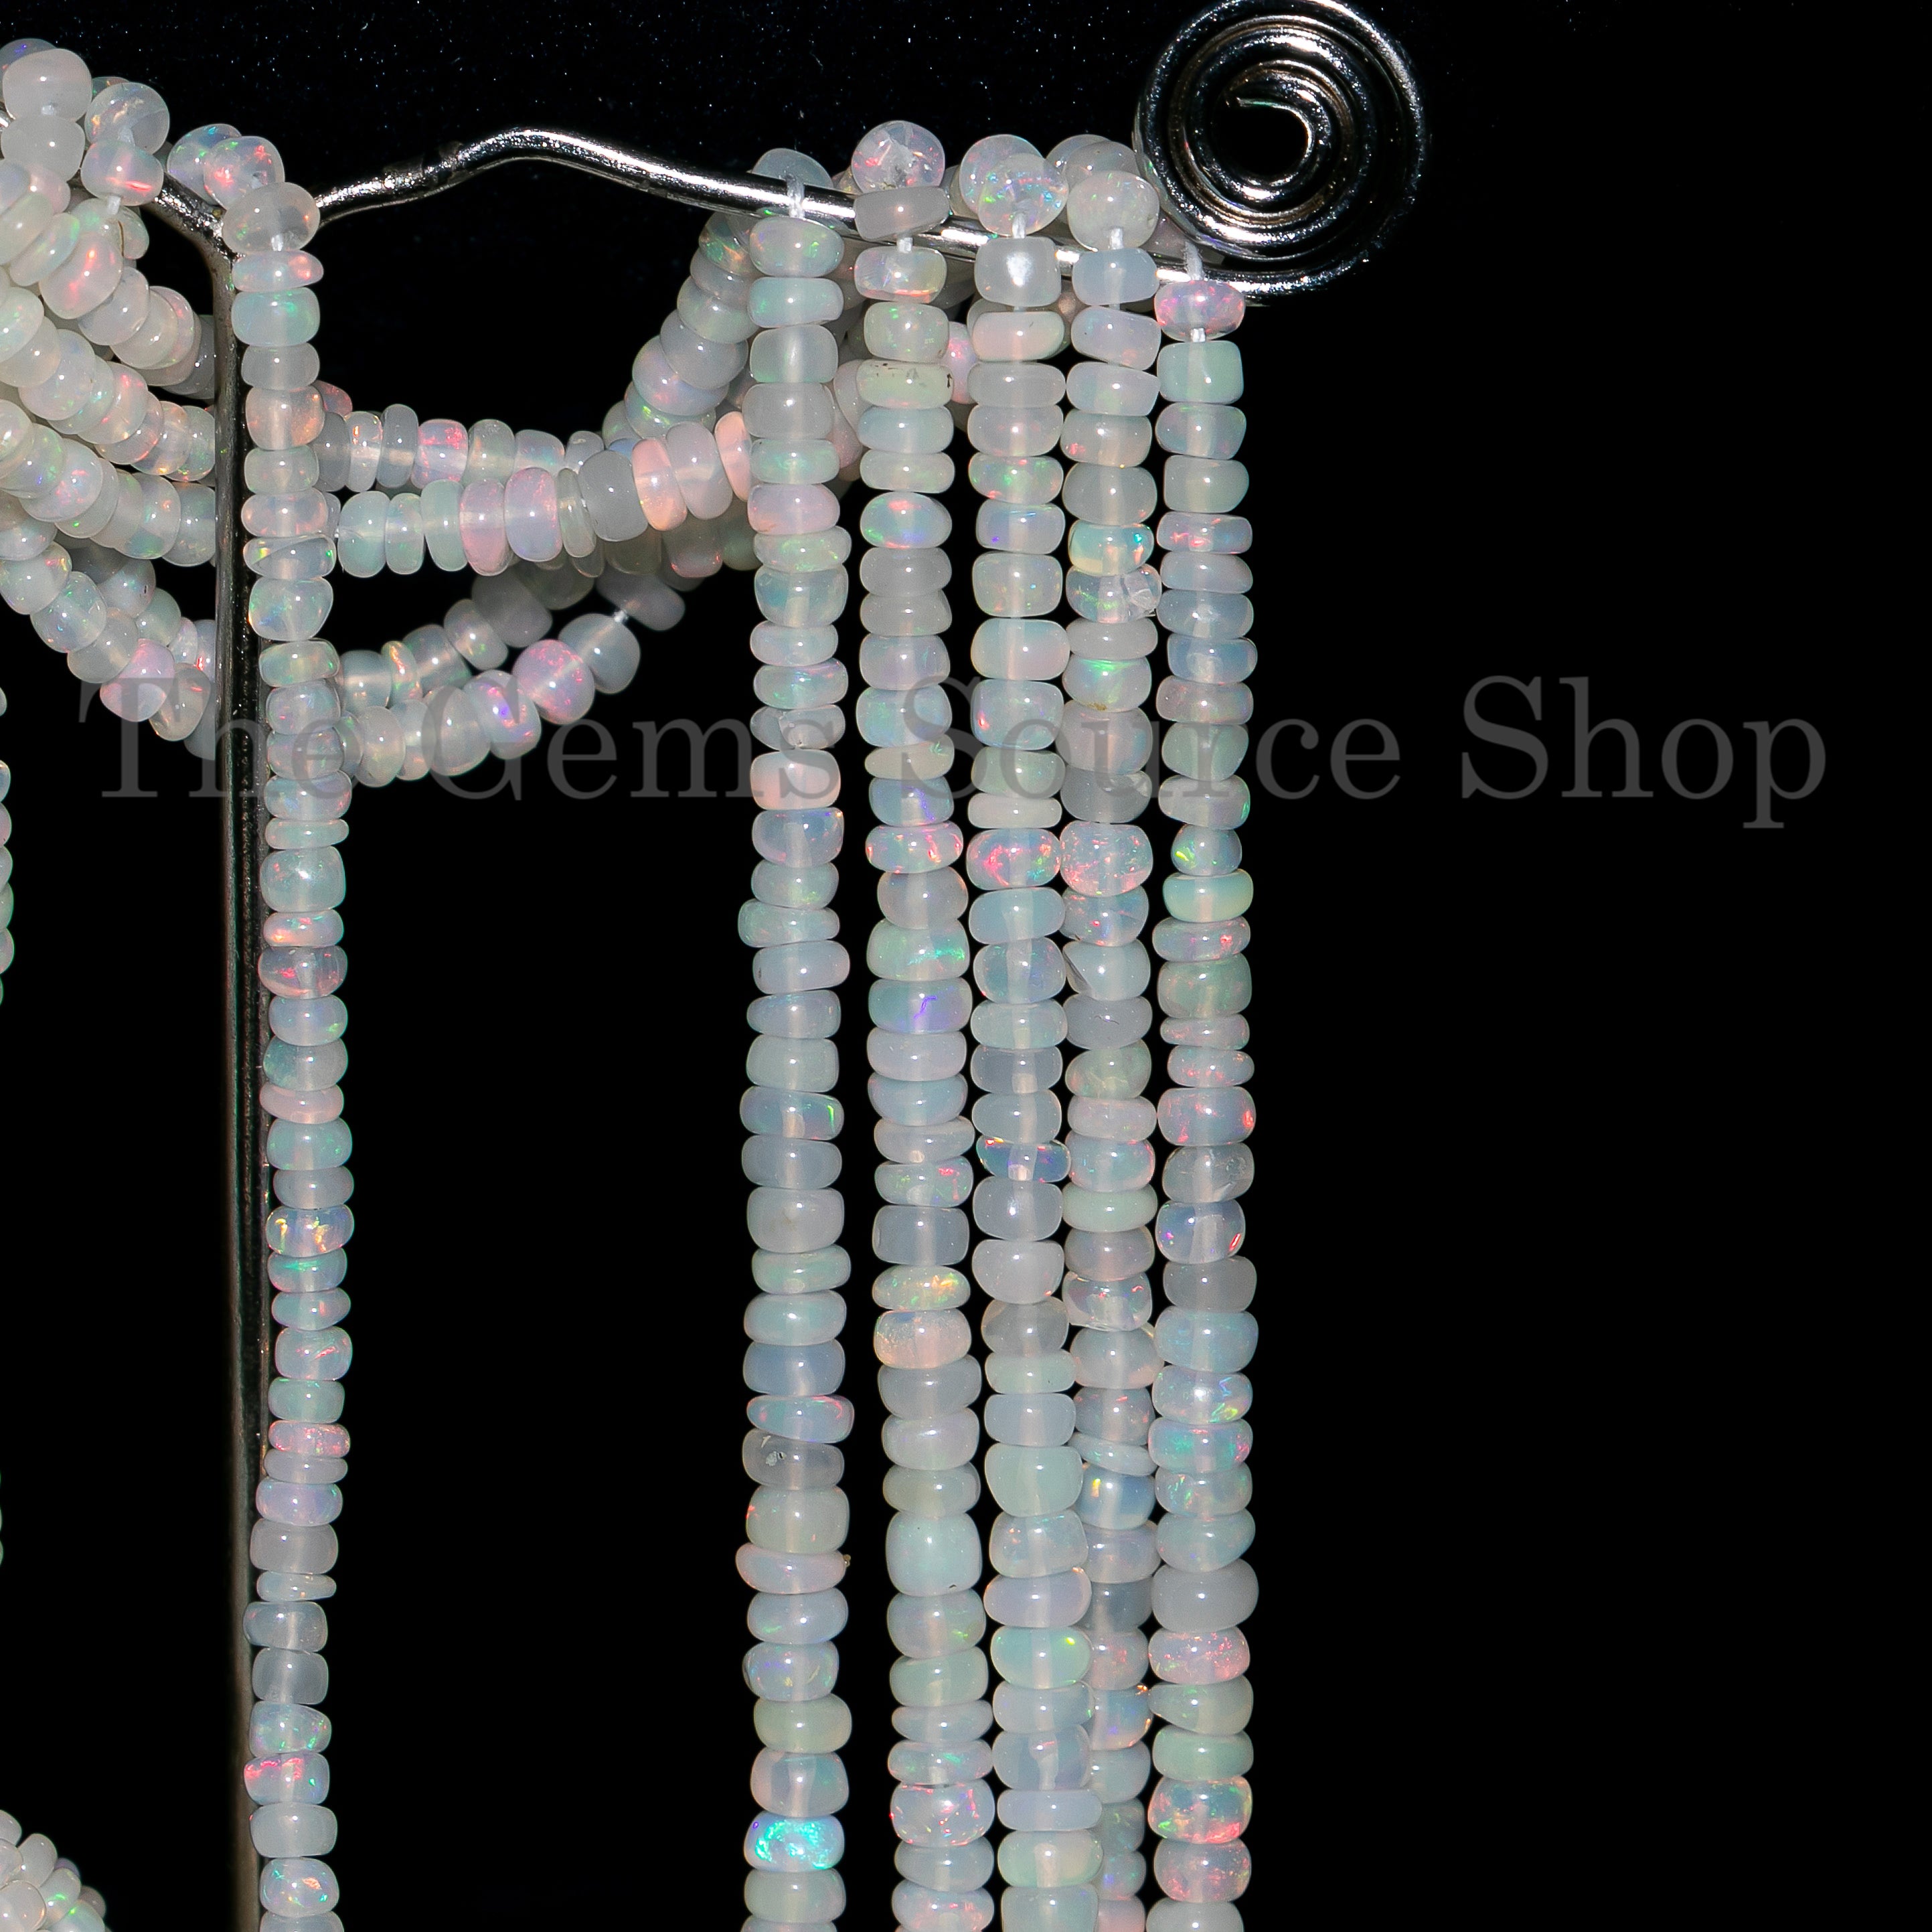 Natural Ethiopian Opal Beads, Opal Smooth Rondelle Gemstone Beads